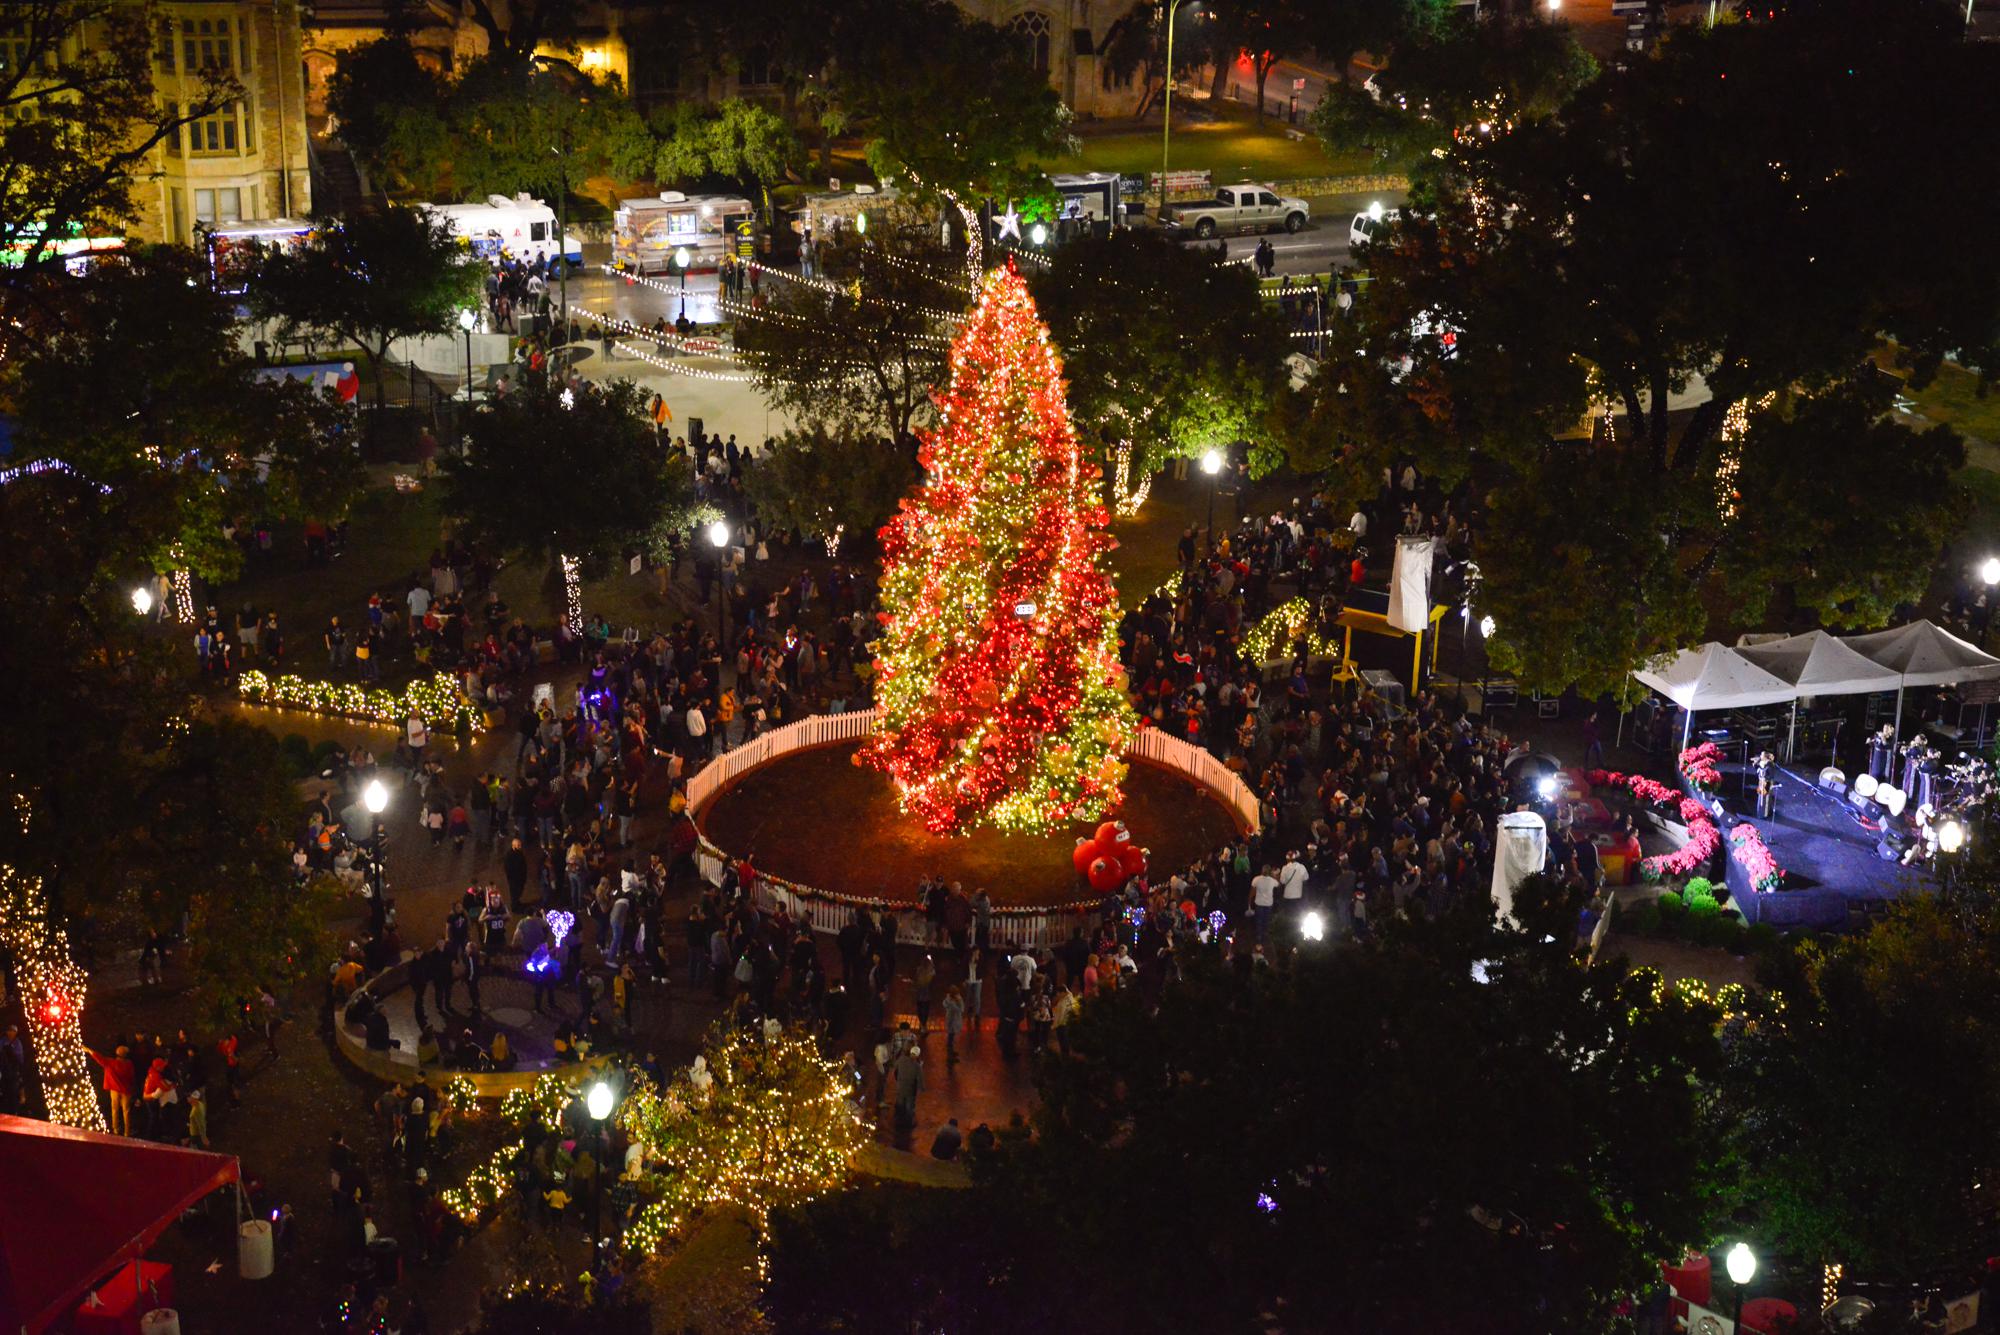 VIA to offer free rides to the HEB Christmas tree lighting